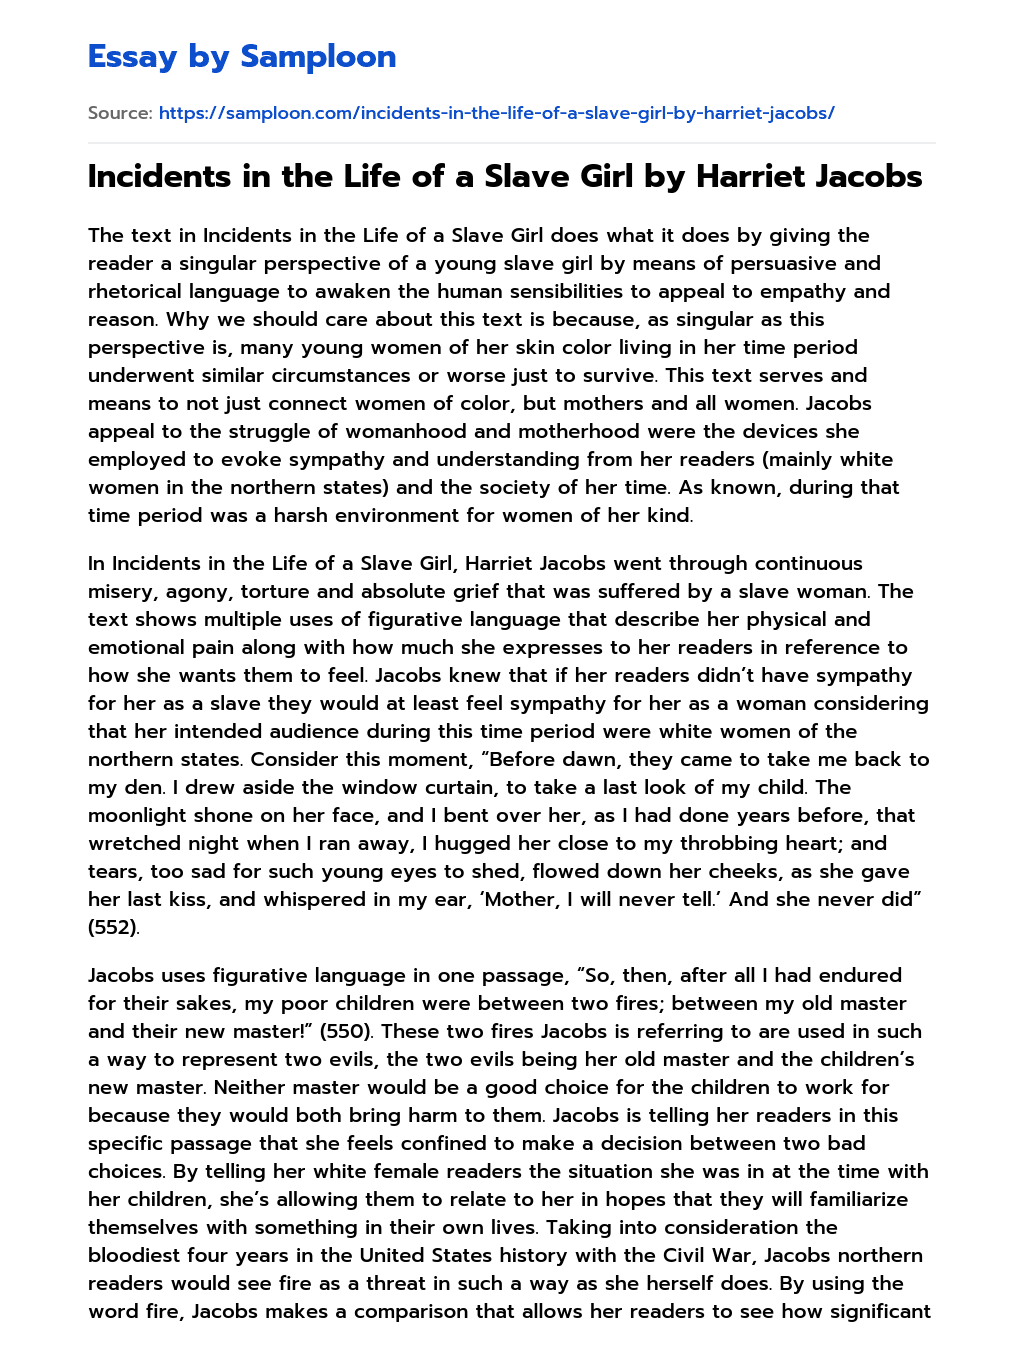 Incidents in the Life of a Slave Girl by Harriet Jacobs essay